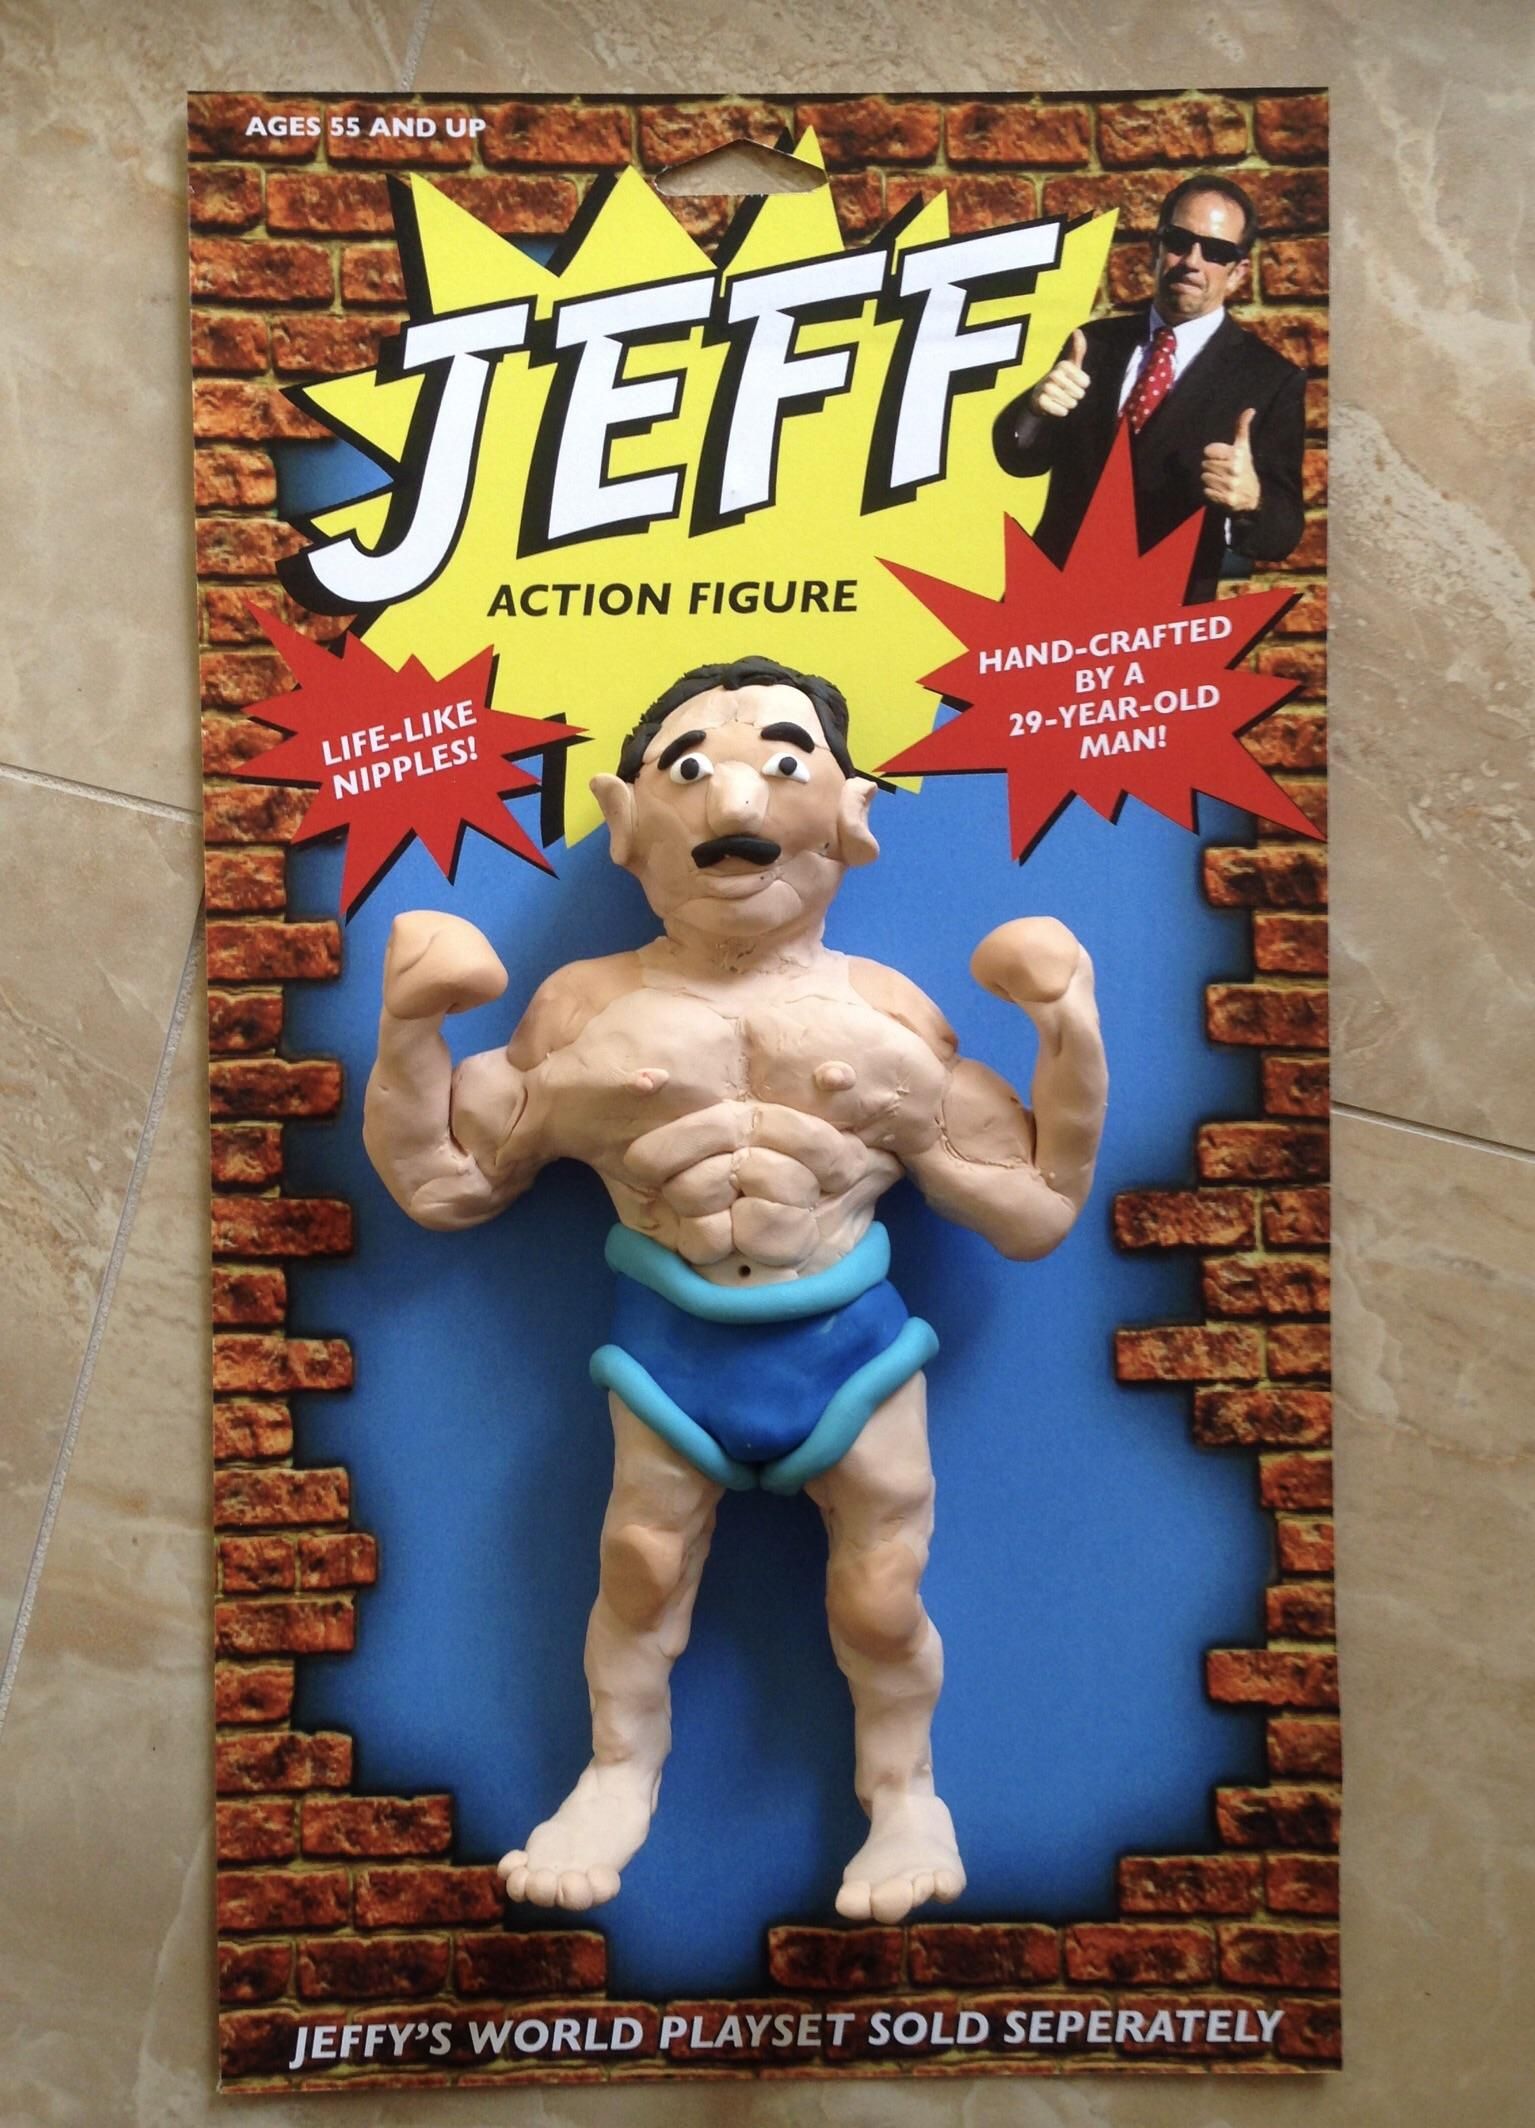 My friend made an action figure of his dad with packaging and everything and gave it to him for Christmas